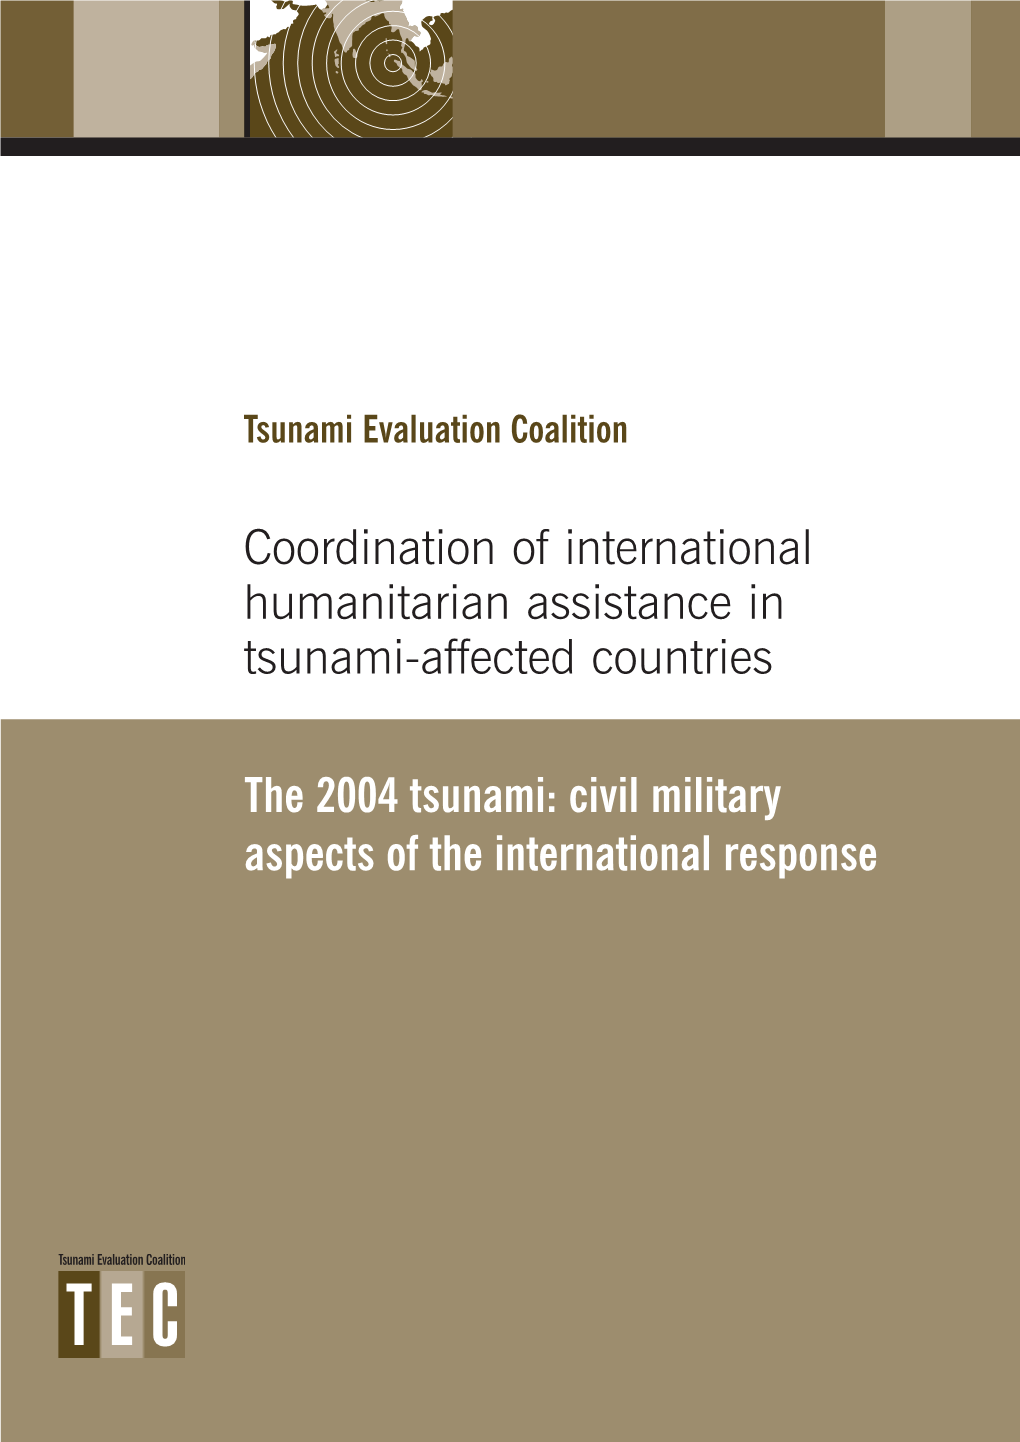 The 2004 Tsunami: Civil Military Aspects of the International Response Note on Civil-Military Coordination